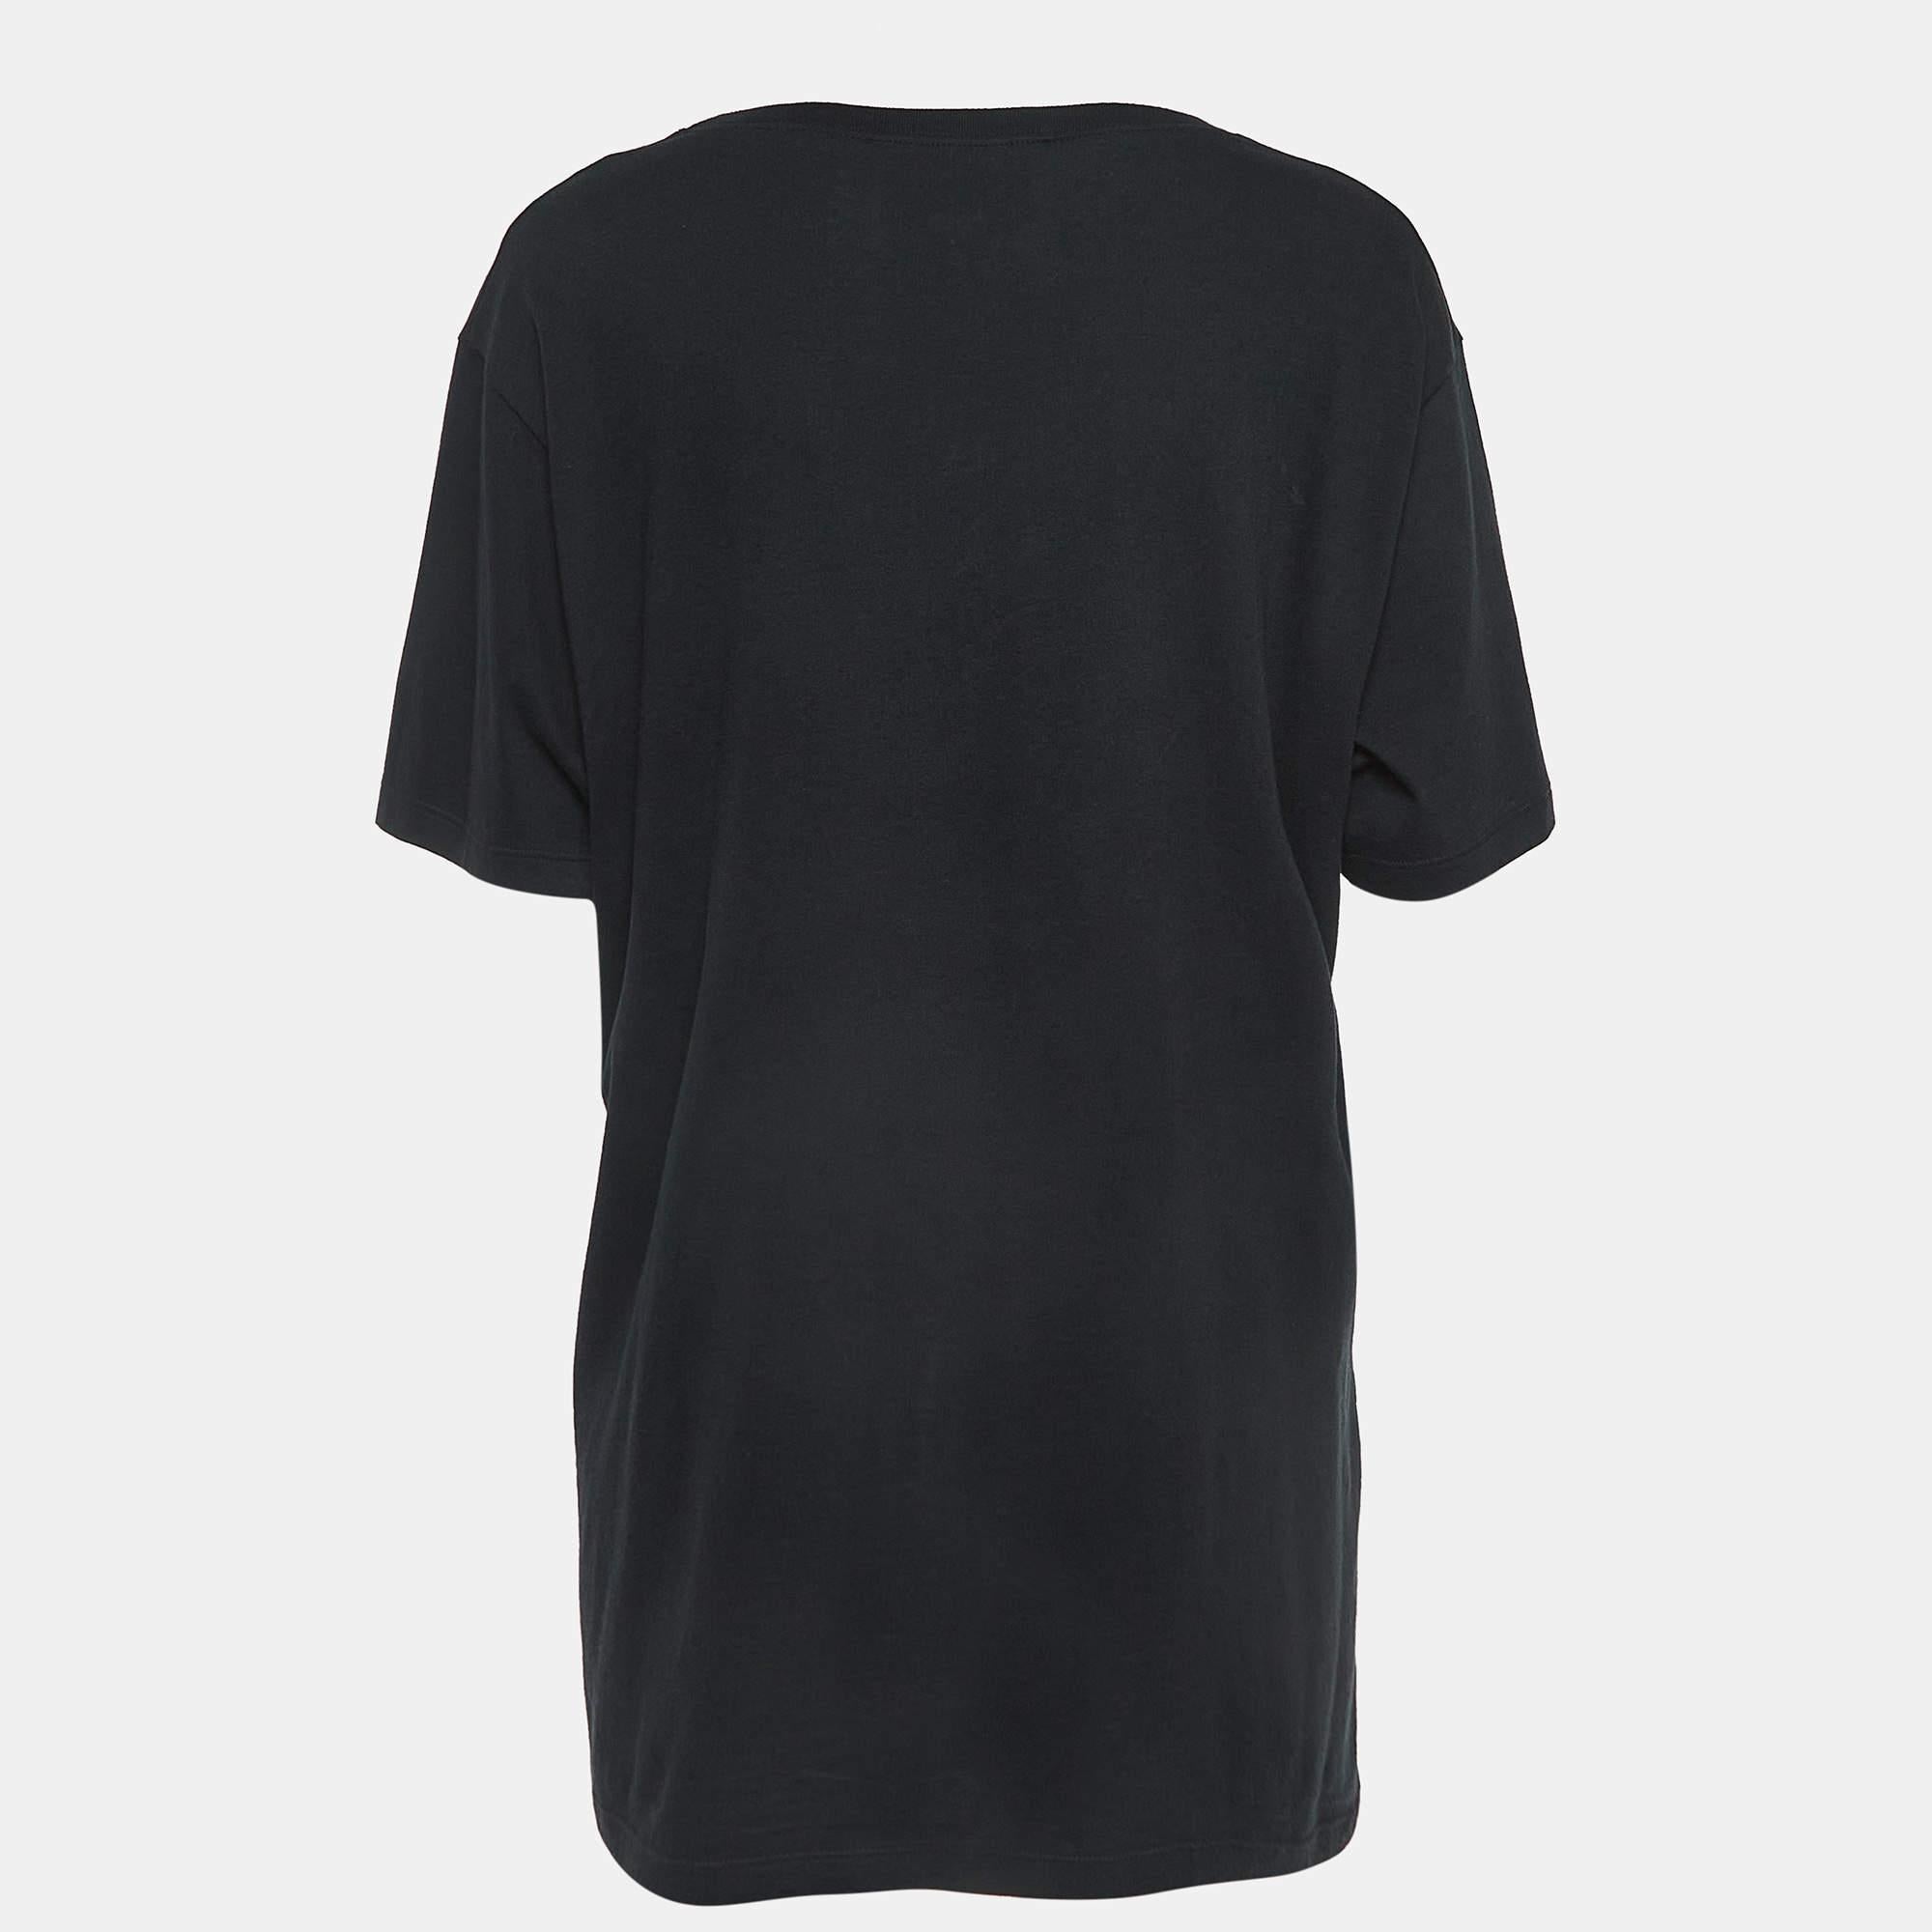 The Gucci t-shirt combines luxury and casual style. Crafted from soft cotton, it features a black base with intricate sequin embellishments, showcasing the iconic Gucci logo. The shirt effortlessly blends comfort and sophistication, making it a